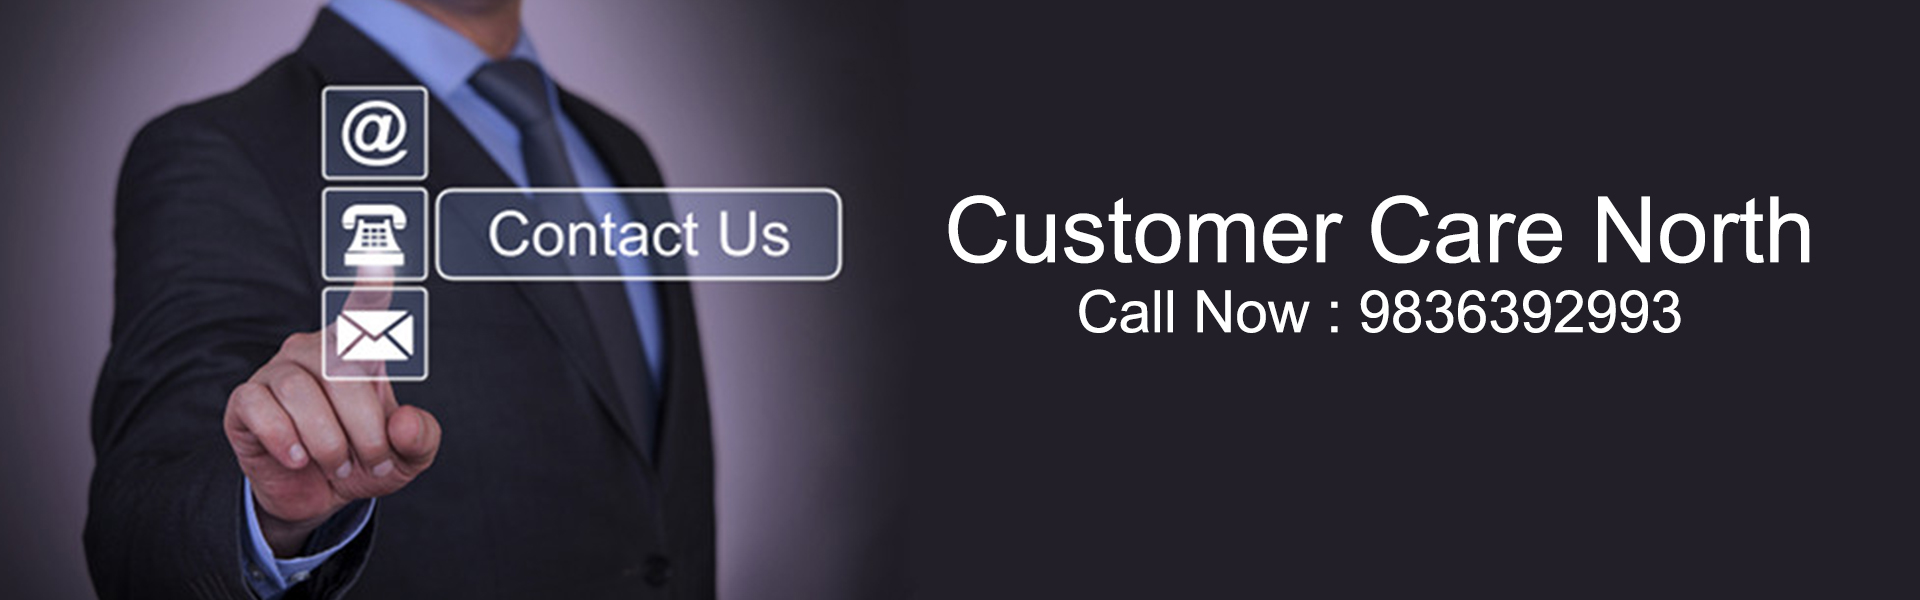 Customer Care North Ac Repair & Services Banner